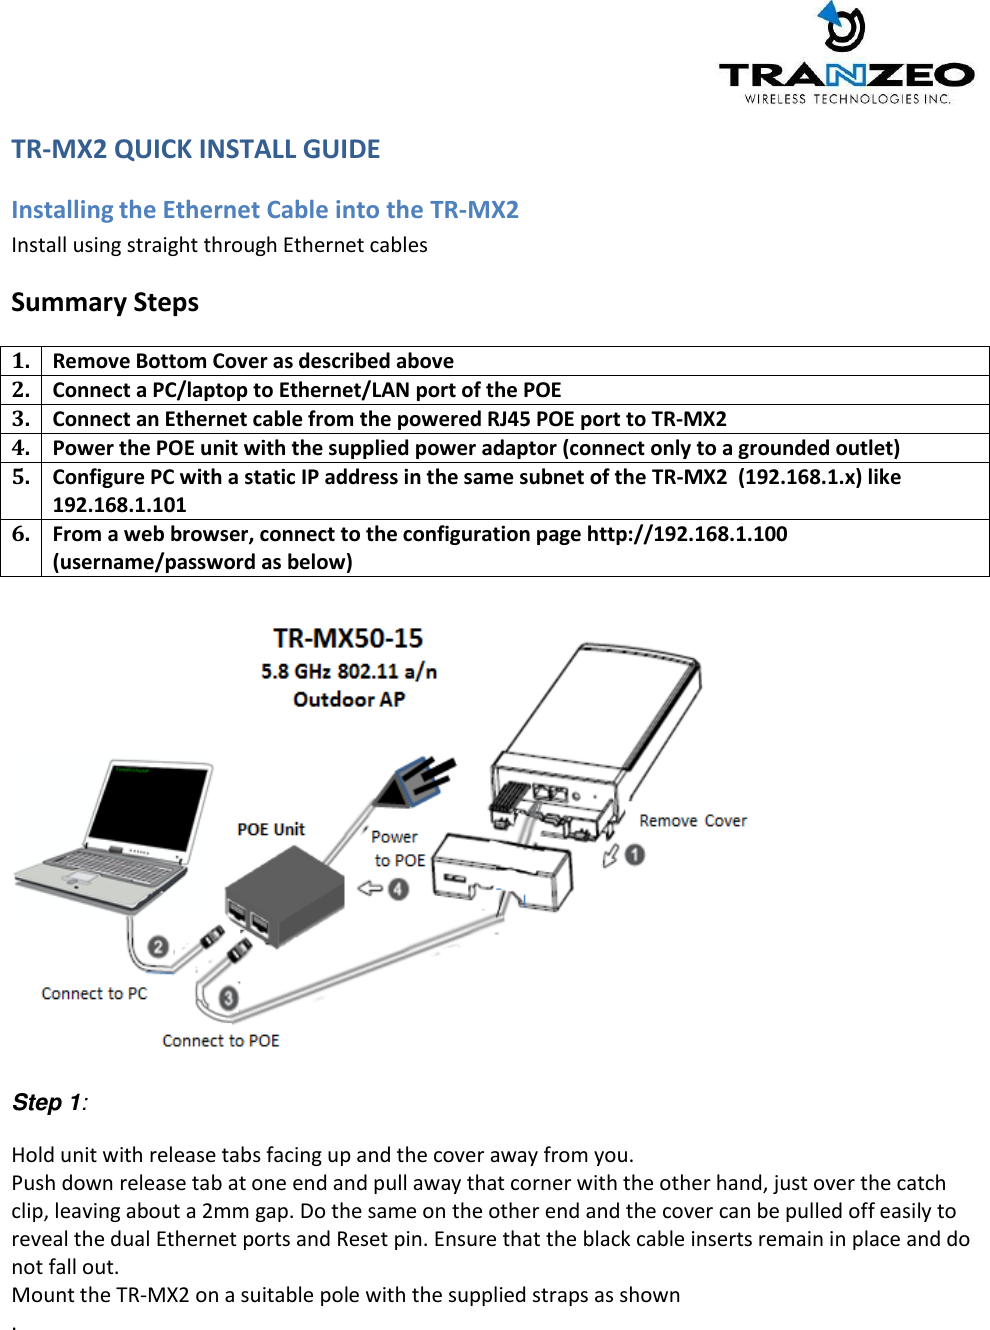     TR-MX2 QUICK INSTALL GUIDE  Installing the Ethernet Cable into the TR-MX2 Install using straight through Ethernet cables Summary Steps 1. Remove Bottom Cover as described above 2. Connect a PC/laptop to Ethernet/LAN port of the POE 3. Connect an Ethernet cable from the powered RJ45 POE port to TR-MX2 4. Power the POE unit with the supplied power adaptor (connect only to a grounded outlet) 5. Configure PC with a static IP address in the same subnet of the TR-MX2  (192.168.1.x) like 192.168.1.101 6. From a web browser, connect to the configuration page http://192.168.1.100 (username/password as below)     Step 1:  Hold unit with release tabs facing up and the cover away from you. Push down release tab at one end and pull away that corner with the other hand, just over the catch clip, leaving about a 2mm gap. Do the same on the other end and the cover can be pulled off easily to reveal the dual Ethernet ports and Reset pin. Ensure that the black cable inserts remain in place and do not fall out. Mount the TR-MX2 on a suitable pole with the supplied straps as shown  .  